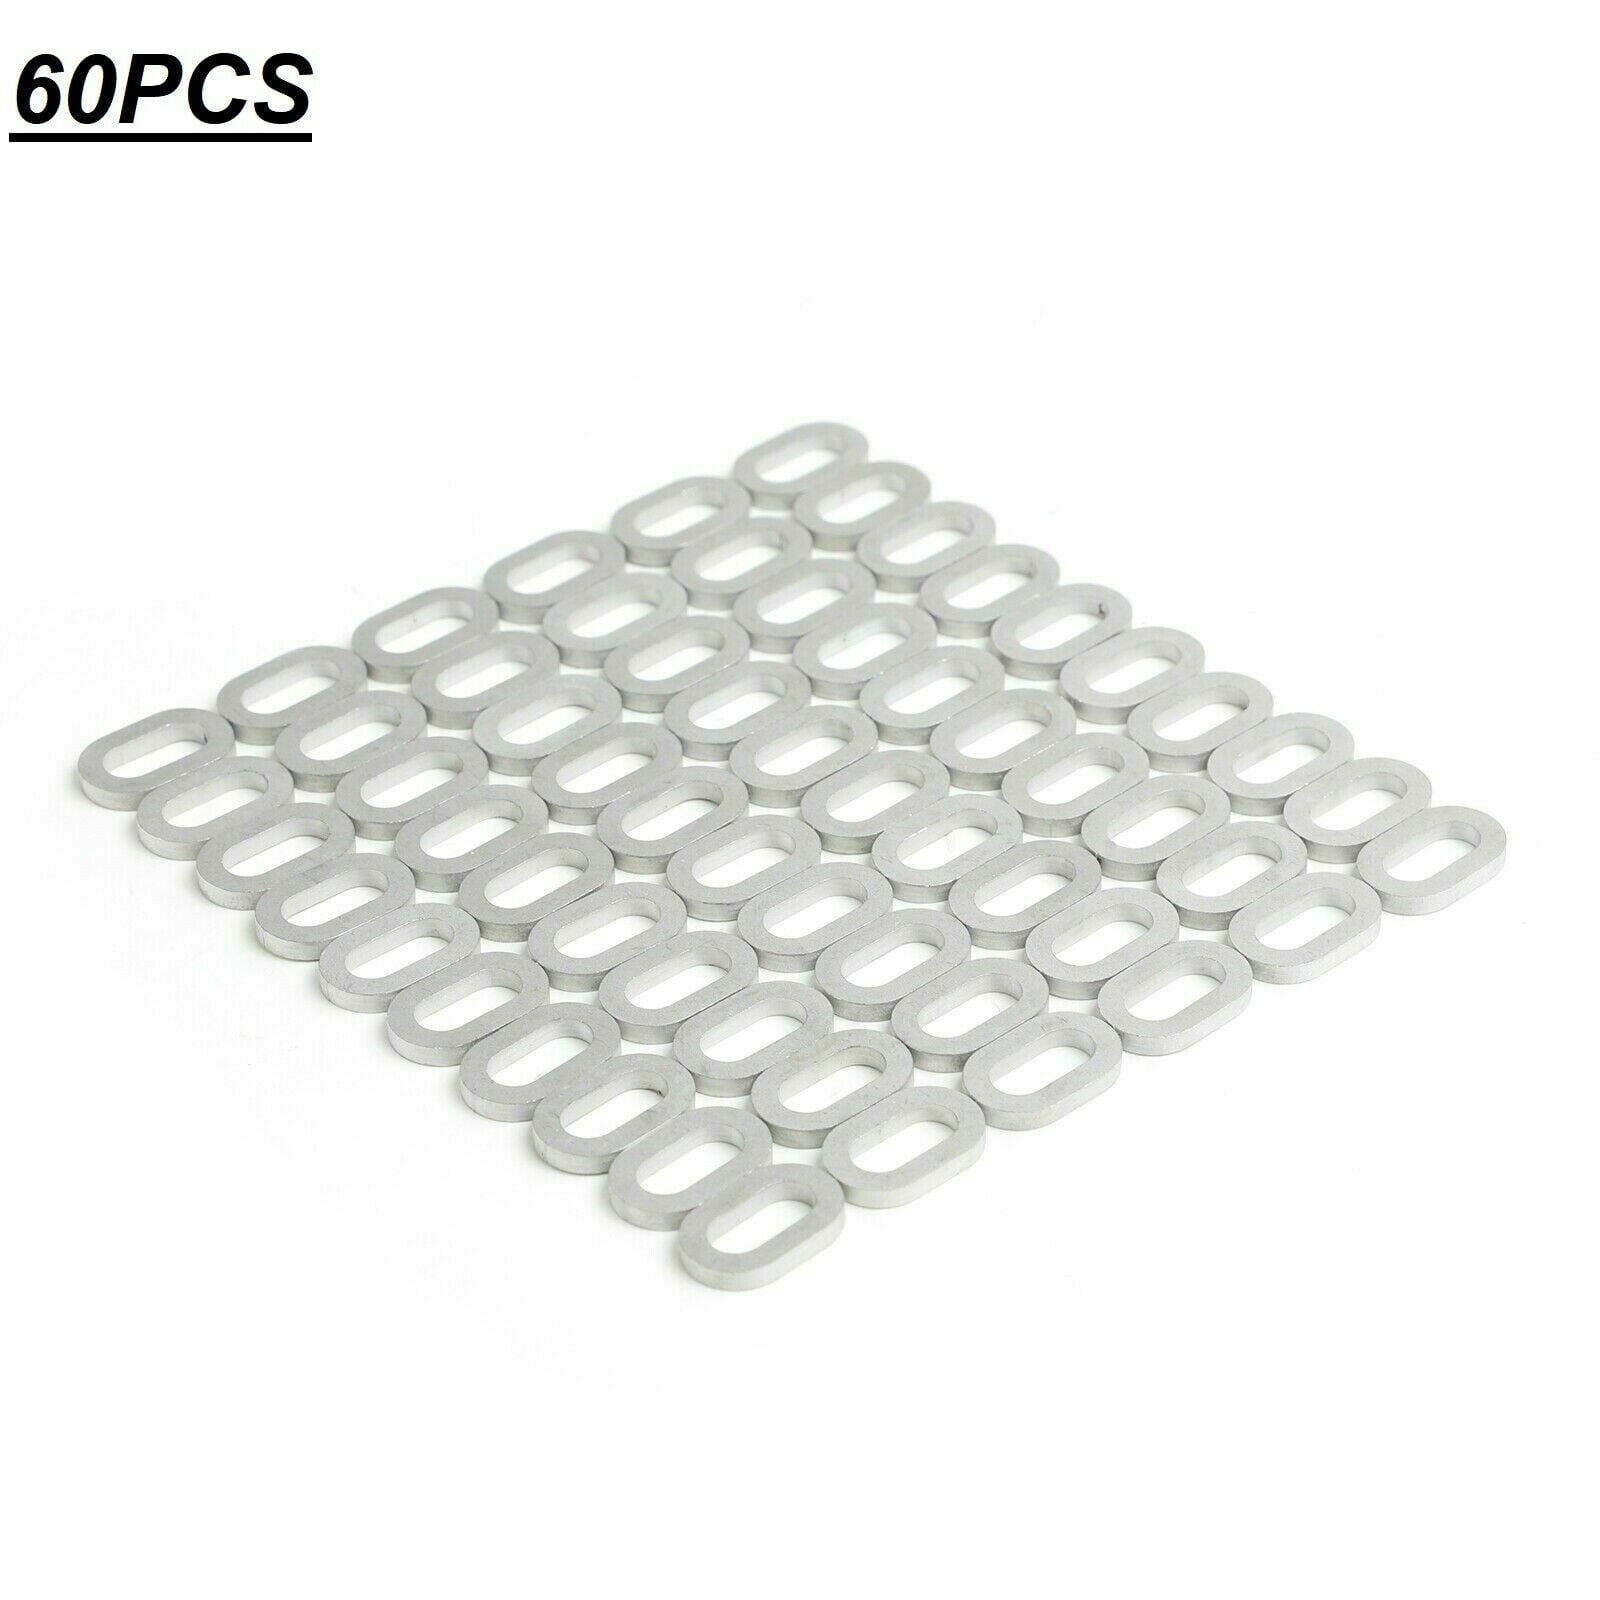 60 PCS SEA-DOO Spark Hull Washer Kit  Stainless Steel Body Deck Washer 291003880